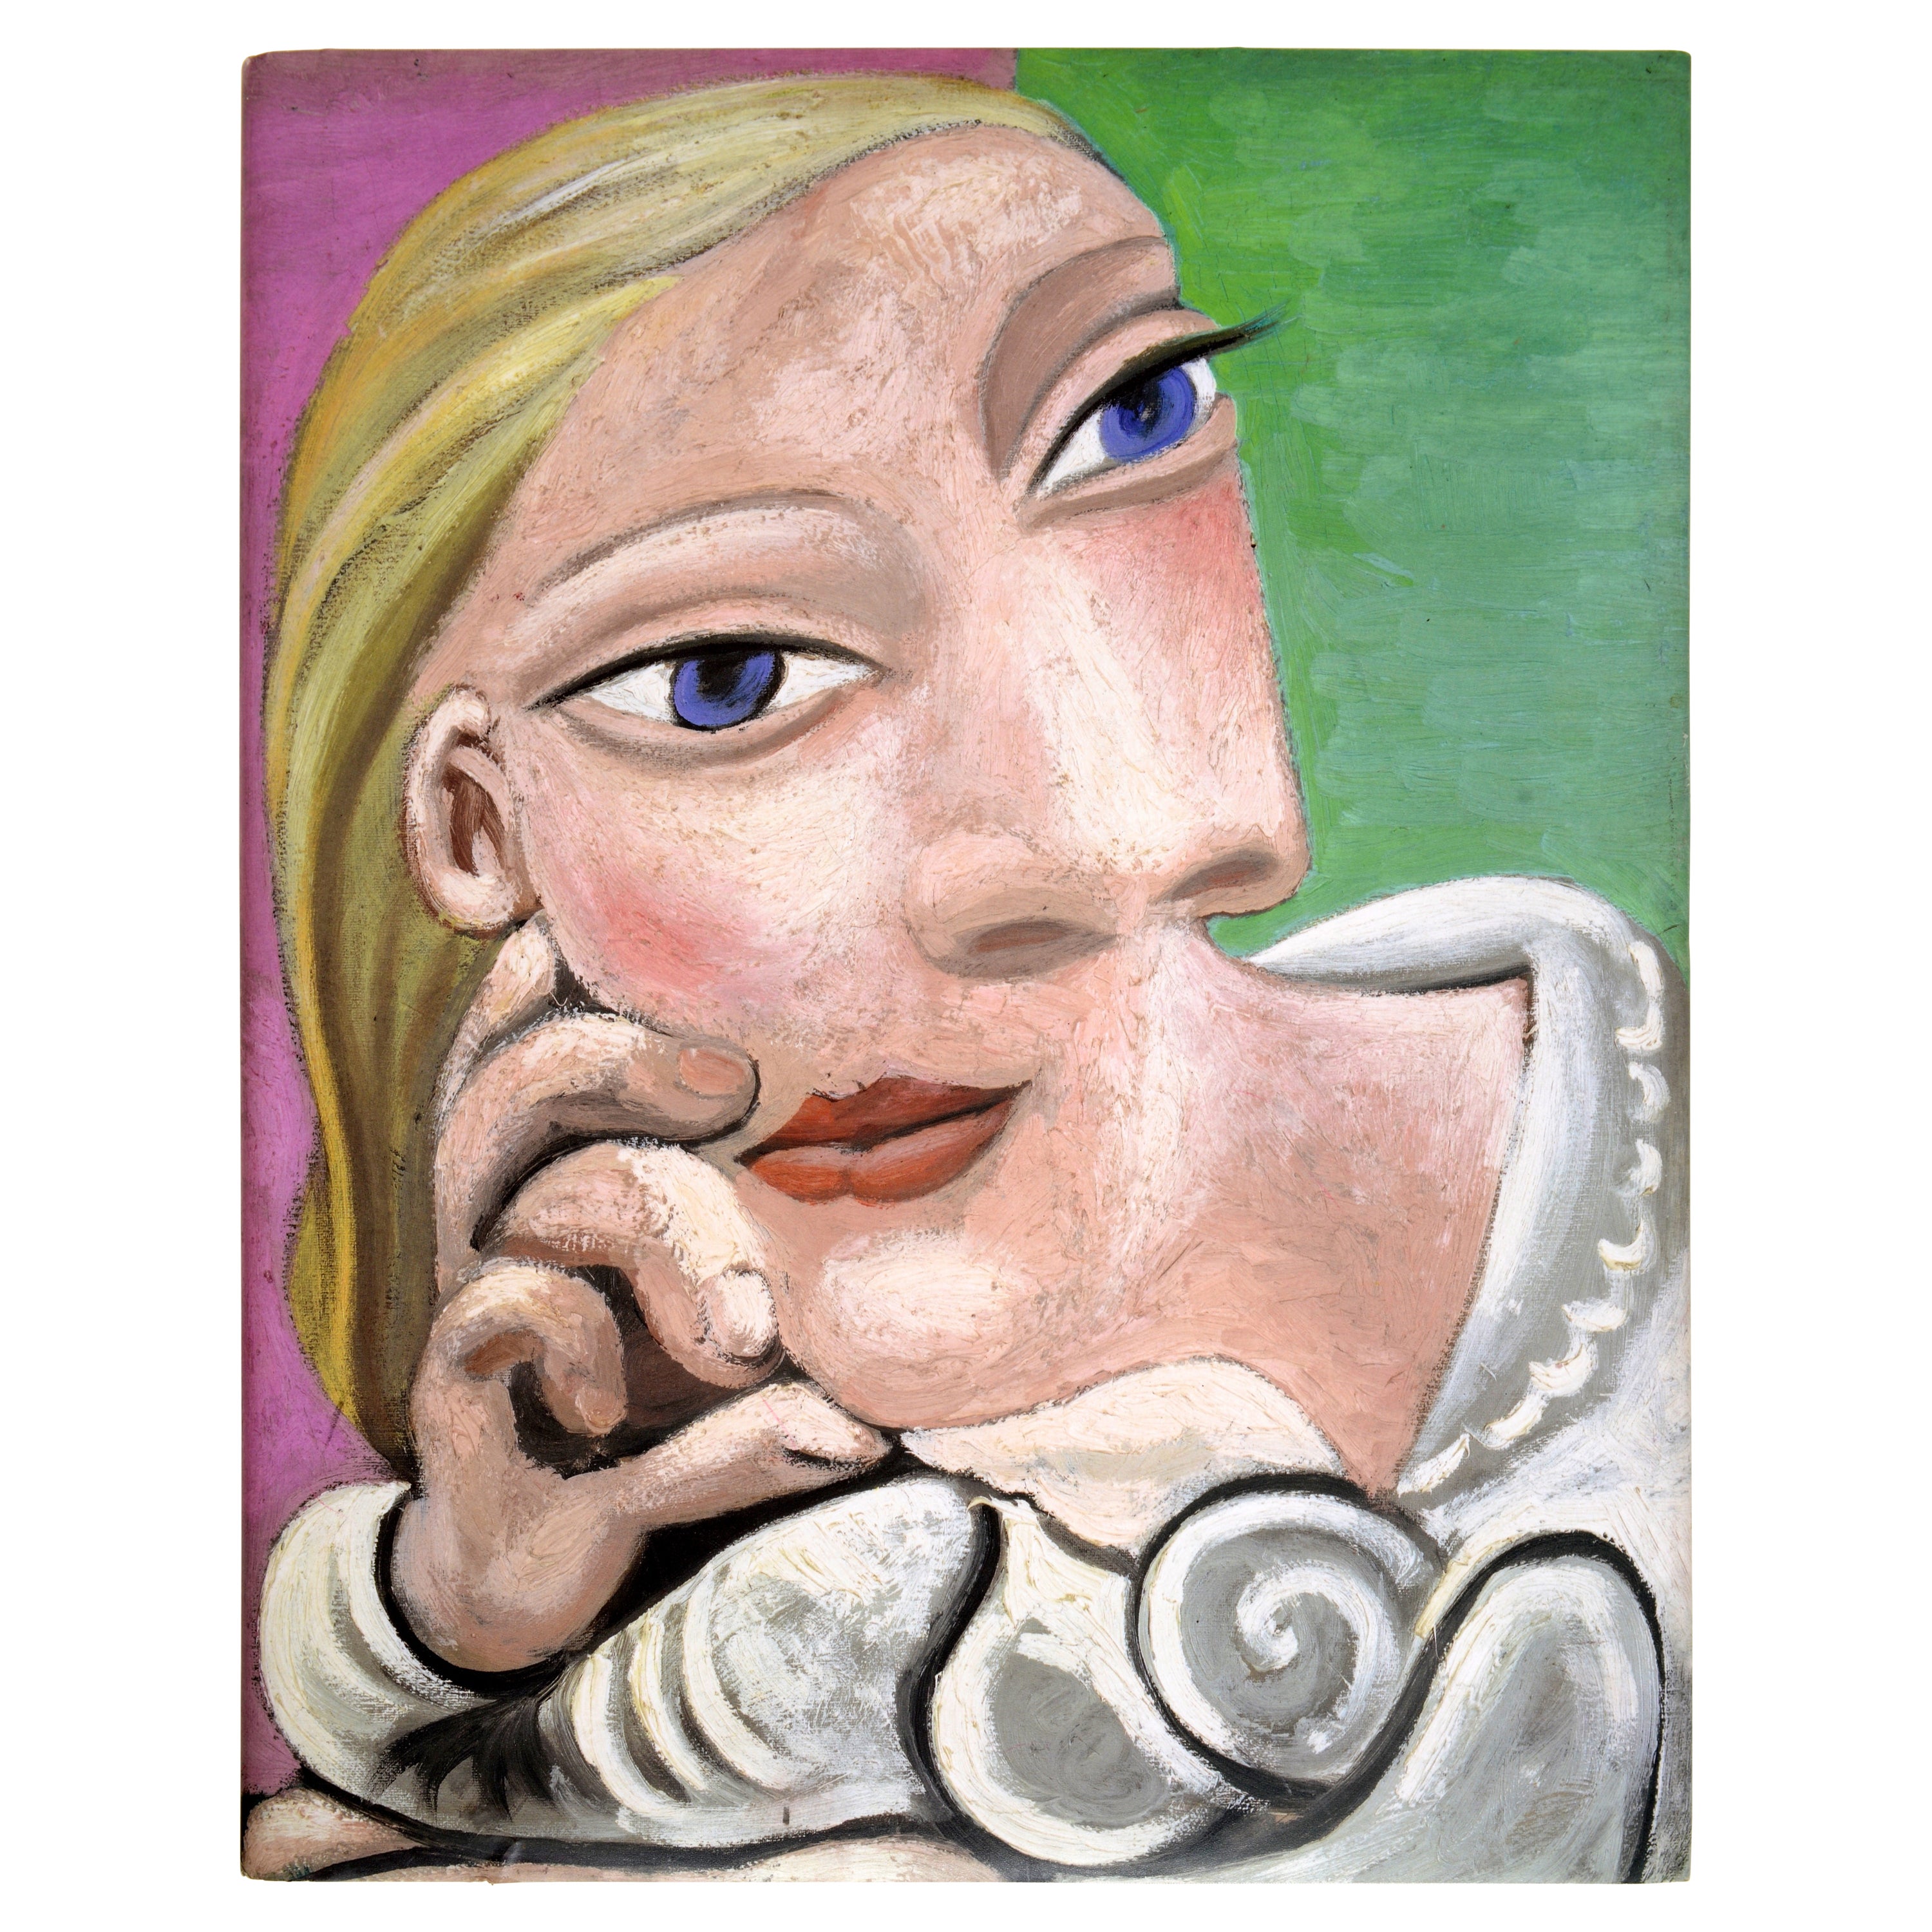 Picasso & Marie-Therese, L'Amour Fou von Richardso & Diana Widmaier, 1. Auflage im Angebot